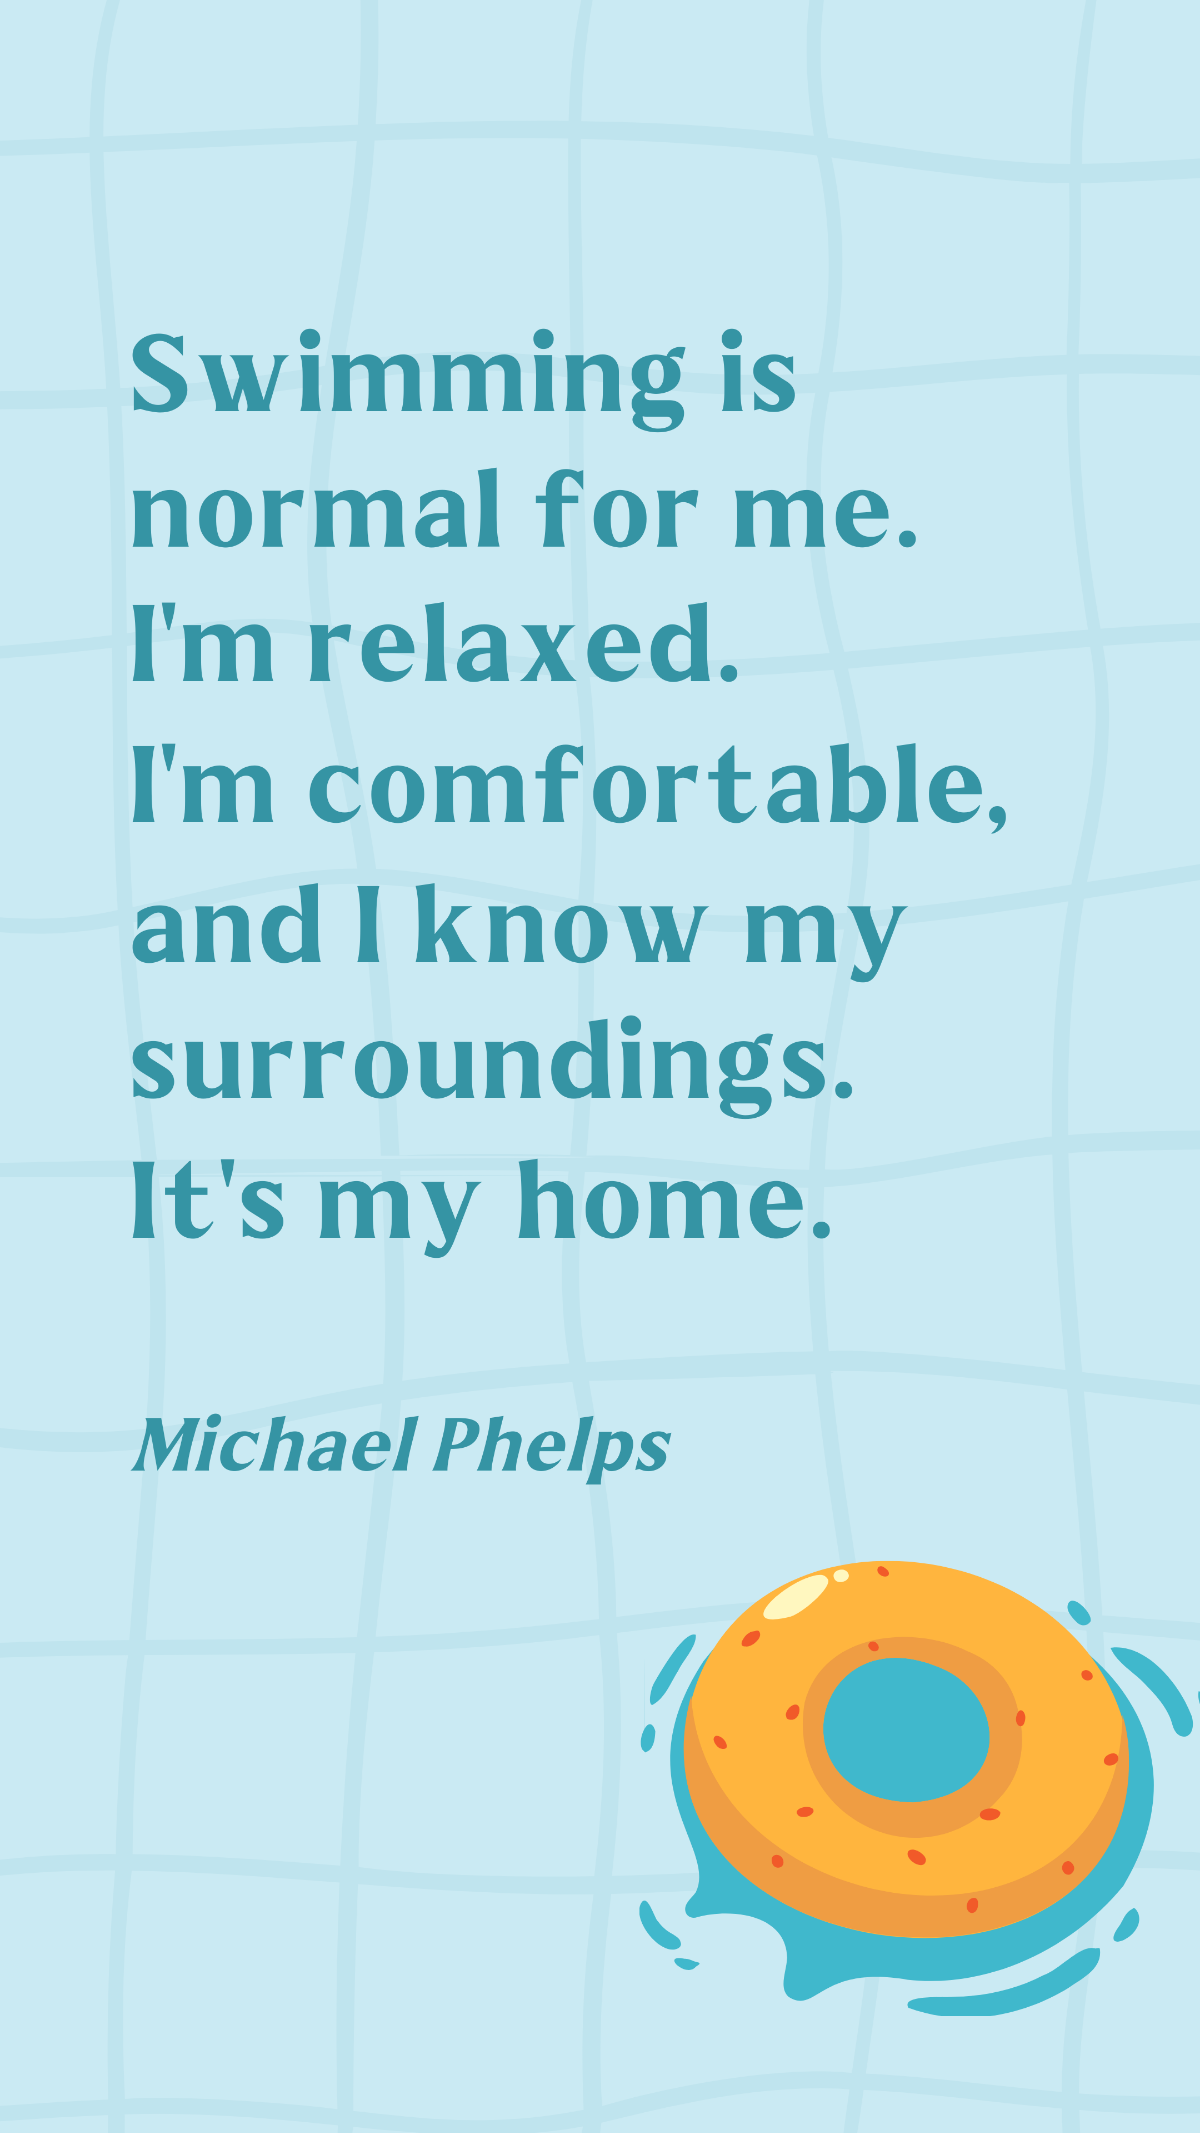 Michael Phelps - Swimming is normal for me. I'm relaxed. I'm comfortable, and I know my surroundings. It's my home. Template